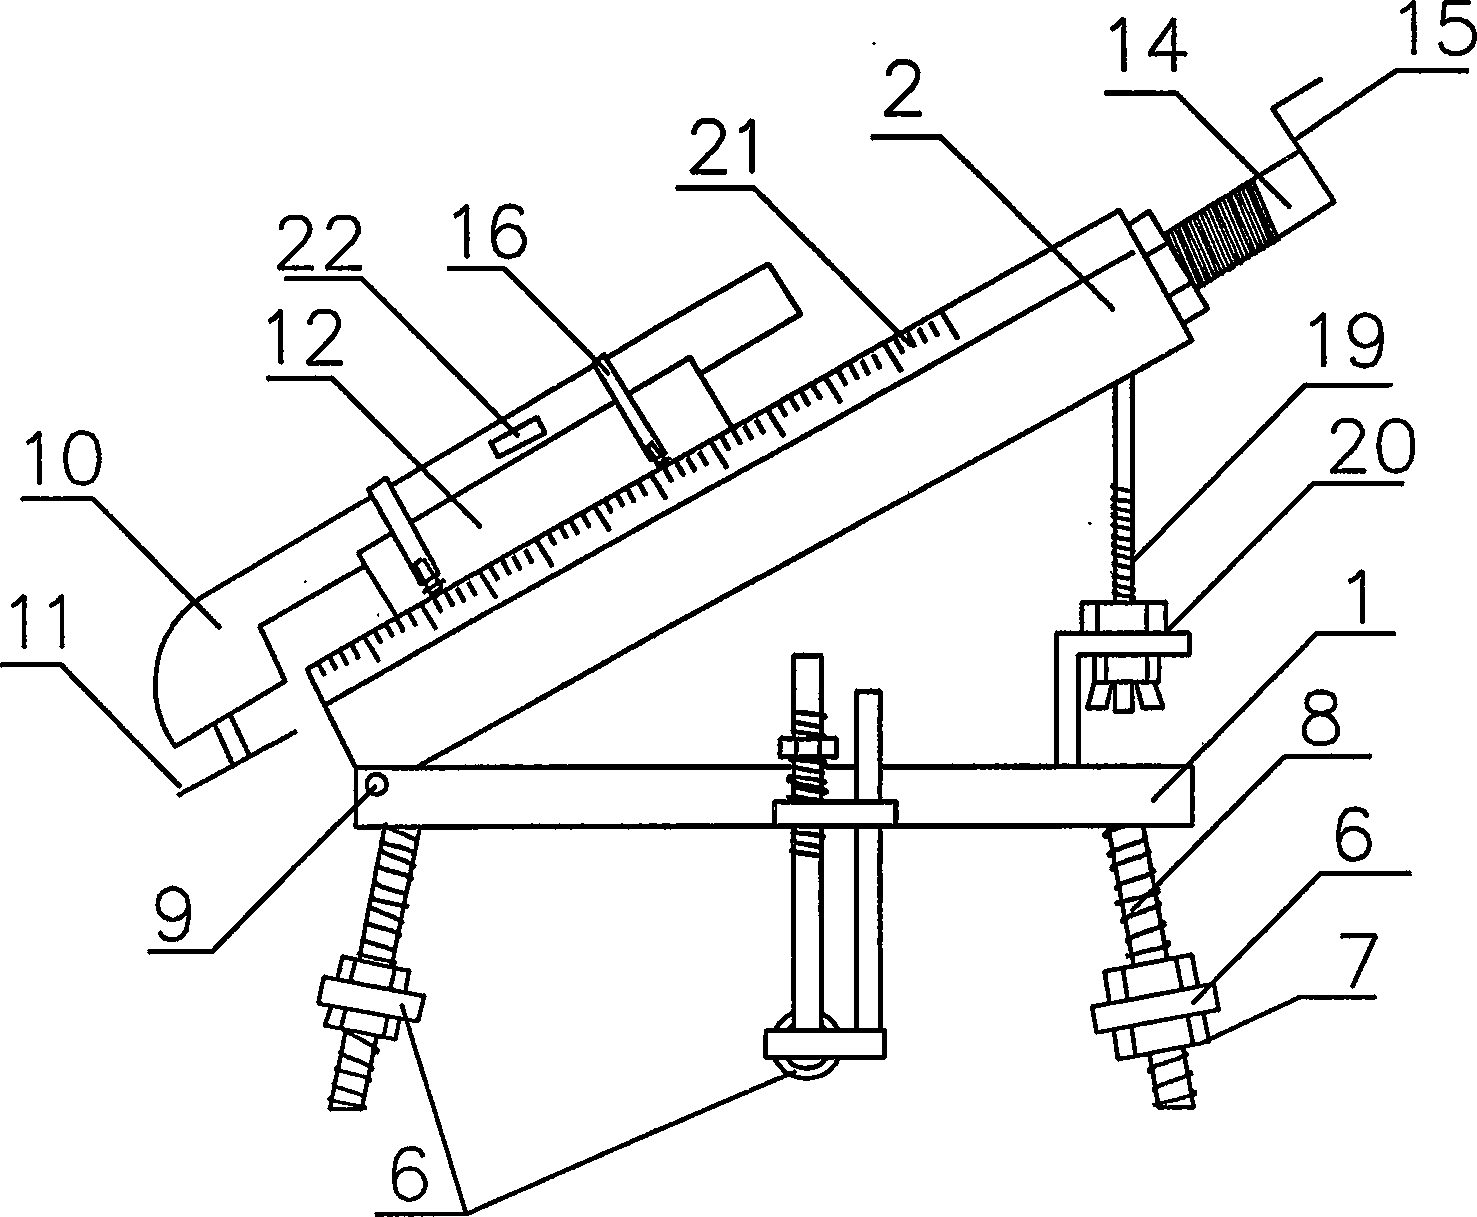 Technique for repairing surface damage on piston rod of hydraulic ram, and dedicated repairing tools